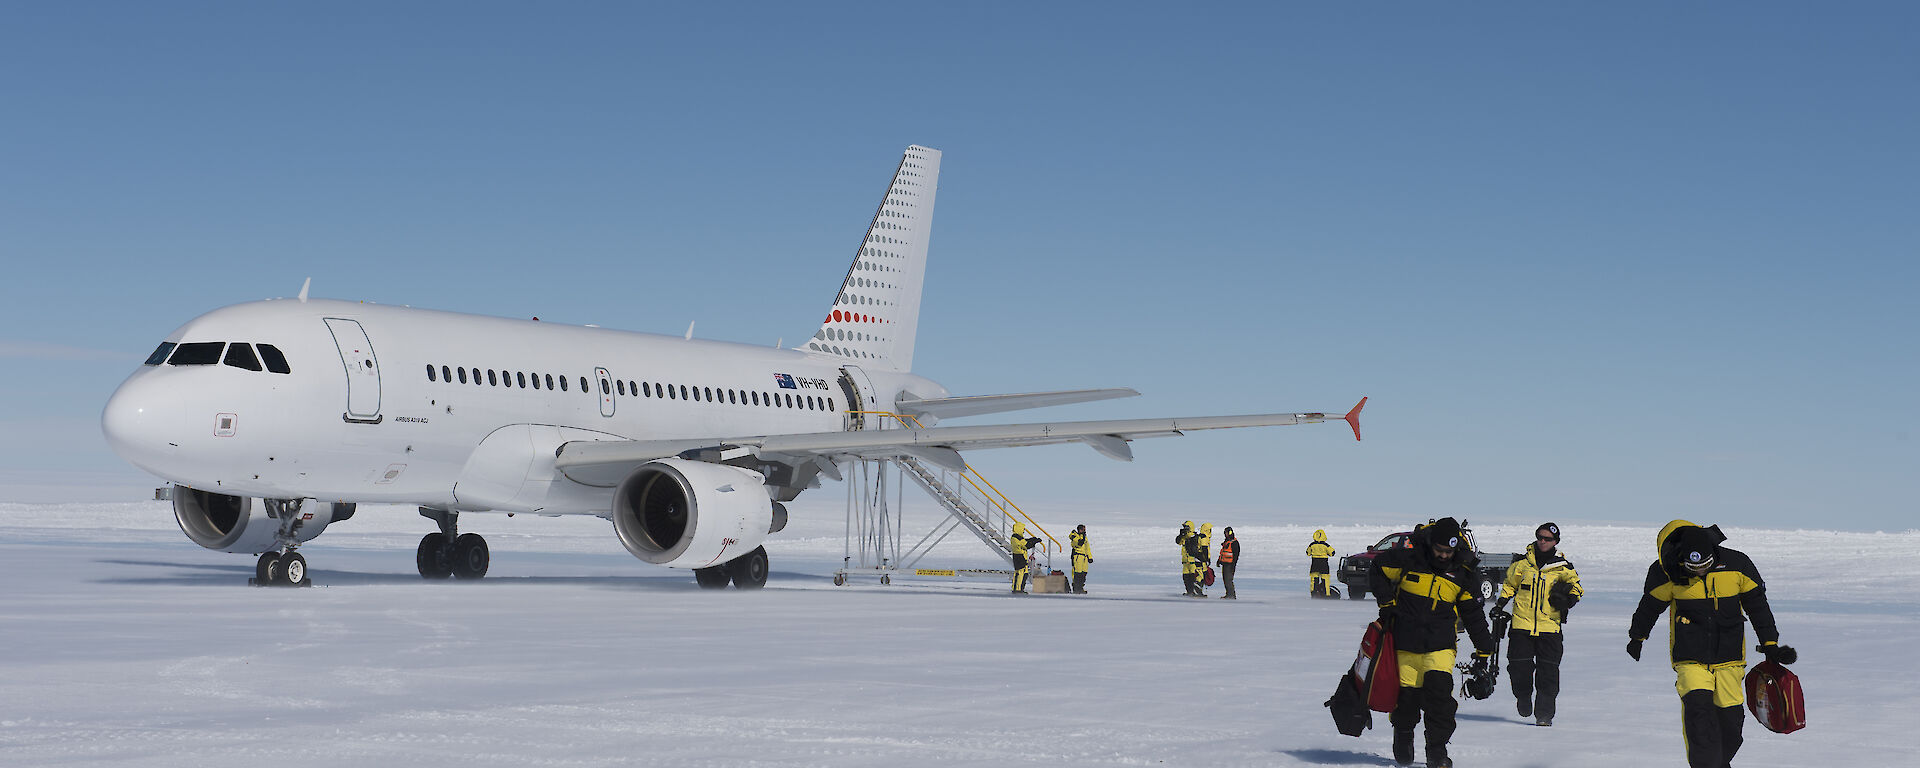 A photo of people walking off a icy runway with a plane in the background